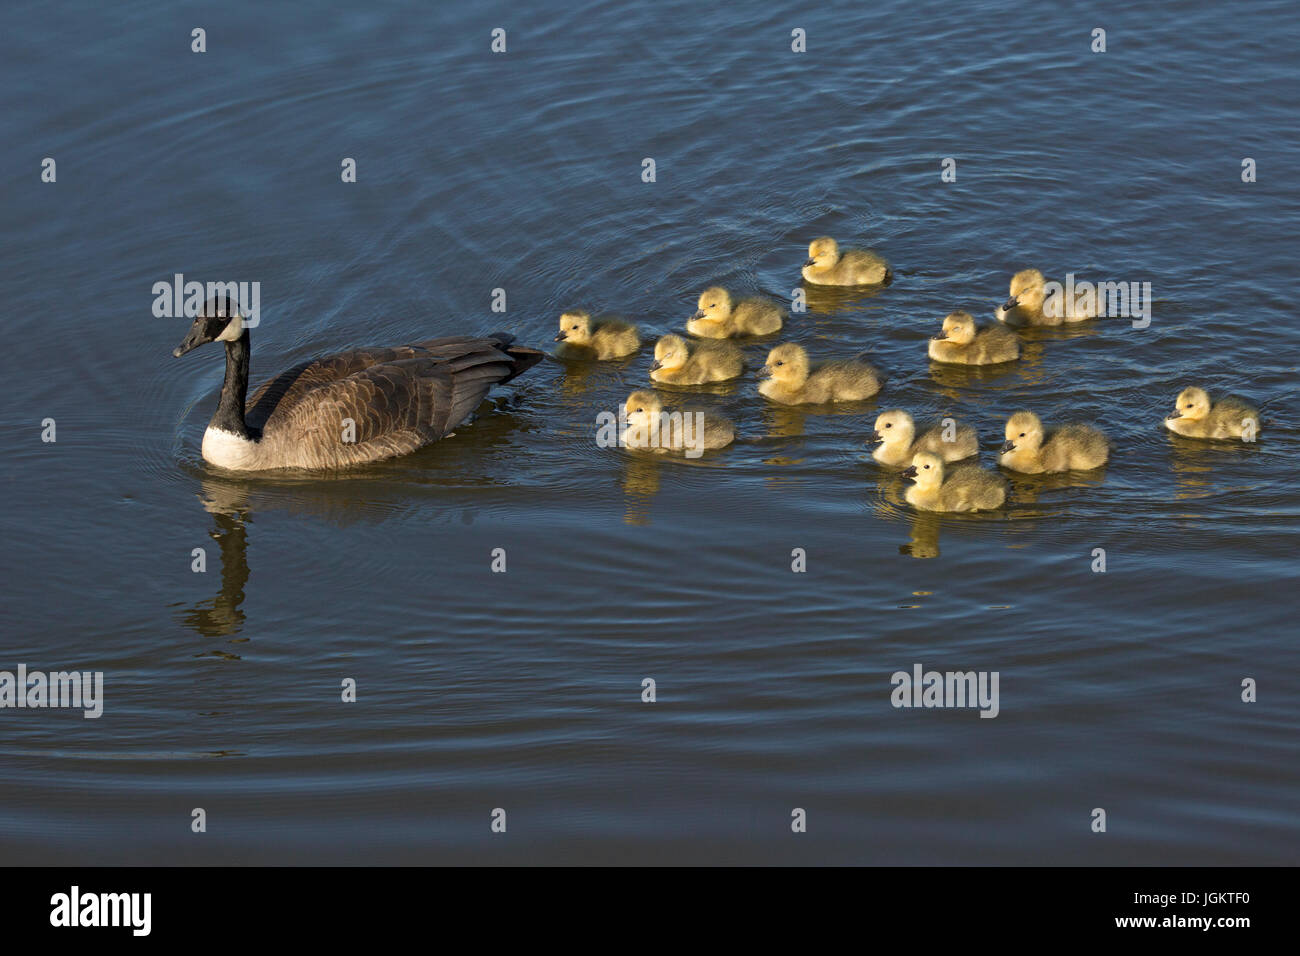 Canada Goose parent bird leading crèche of a dozen young goslings (Branta canadensis) on a stormwater pond in East Village, Calgary Stock Photo